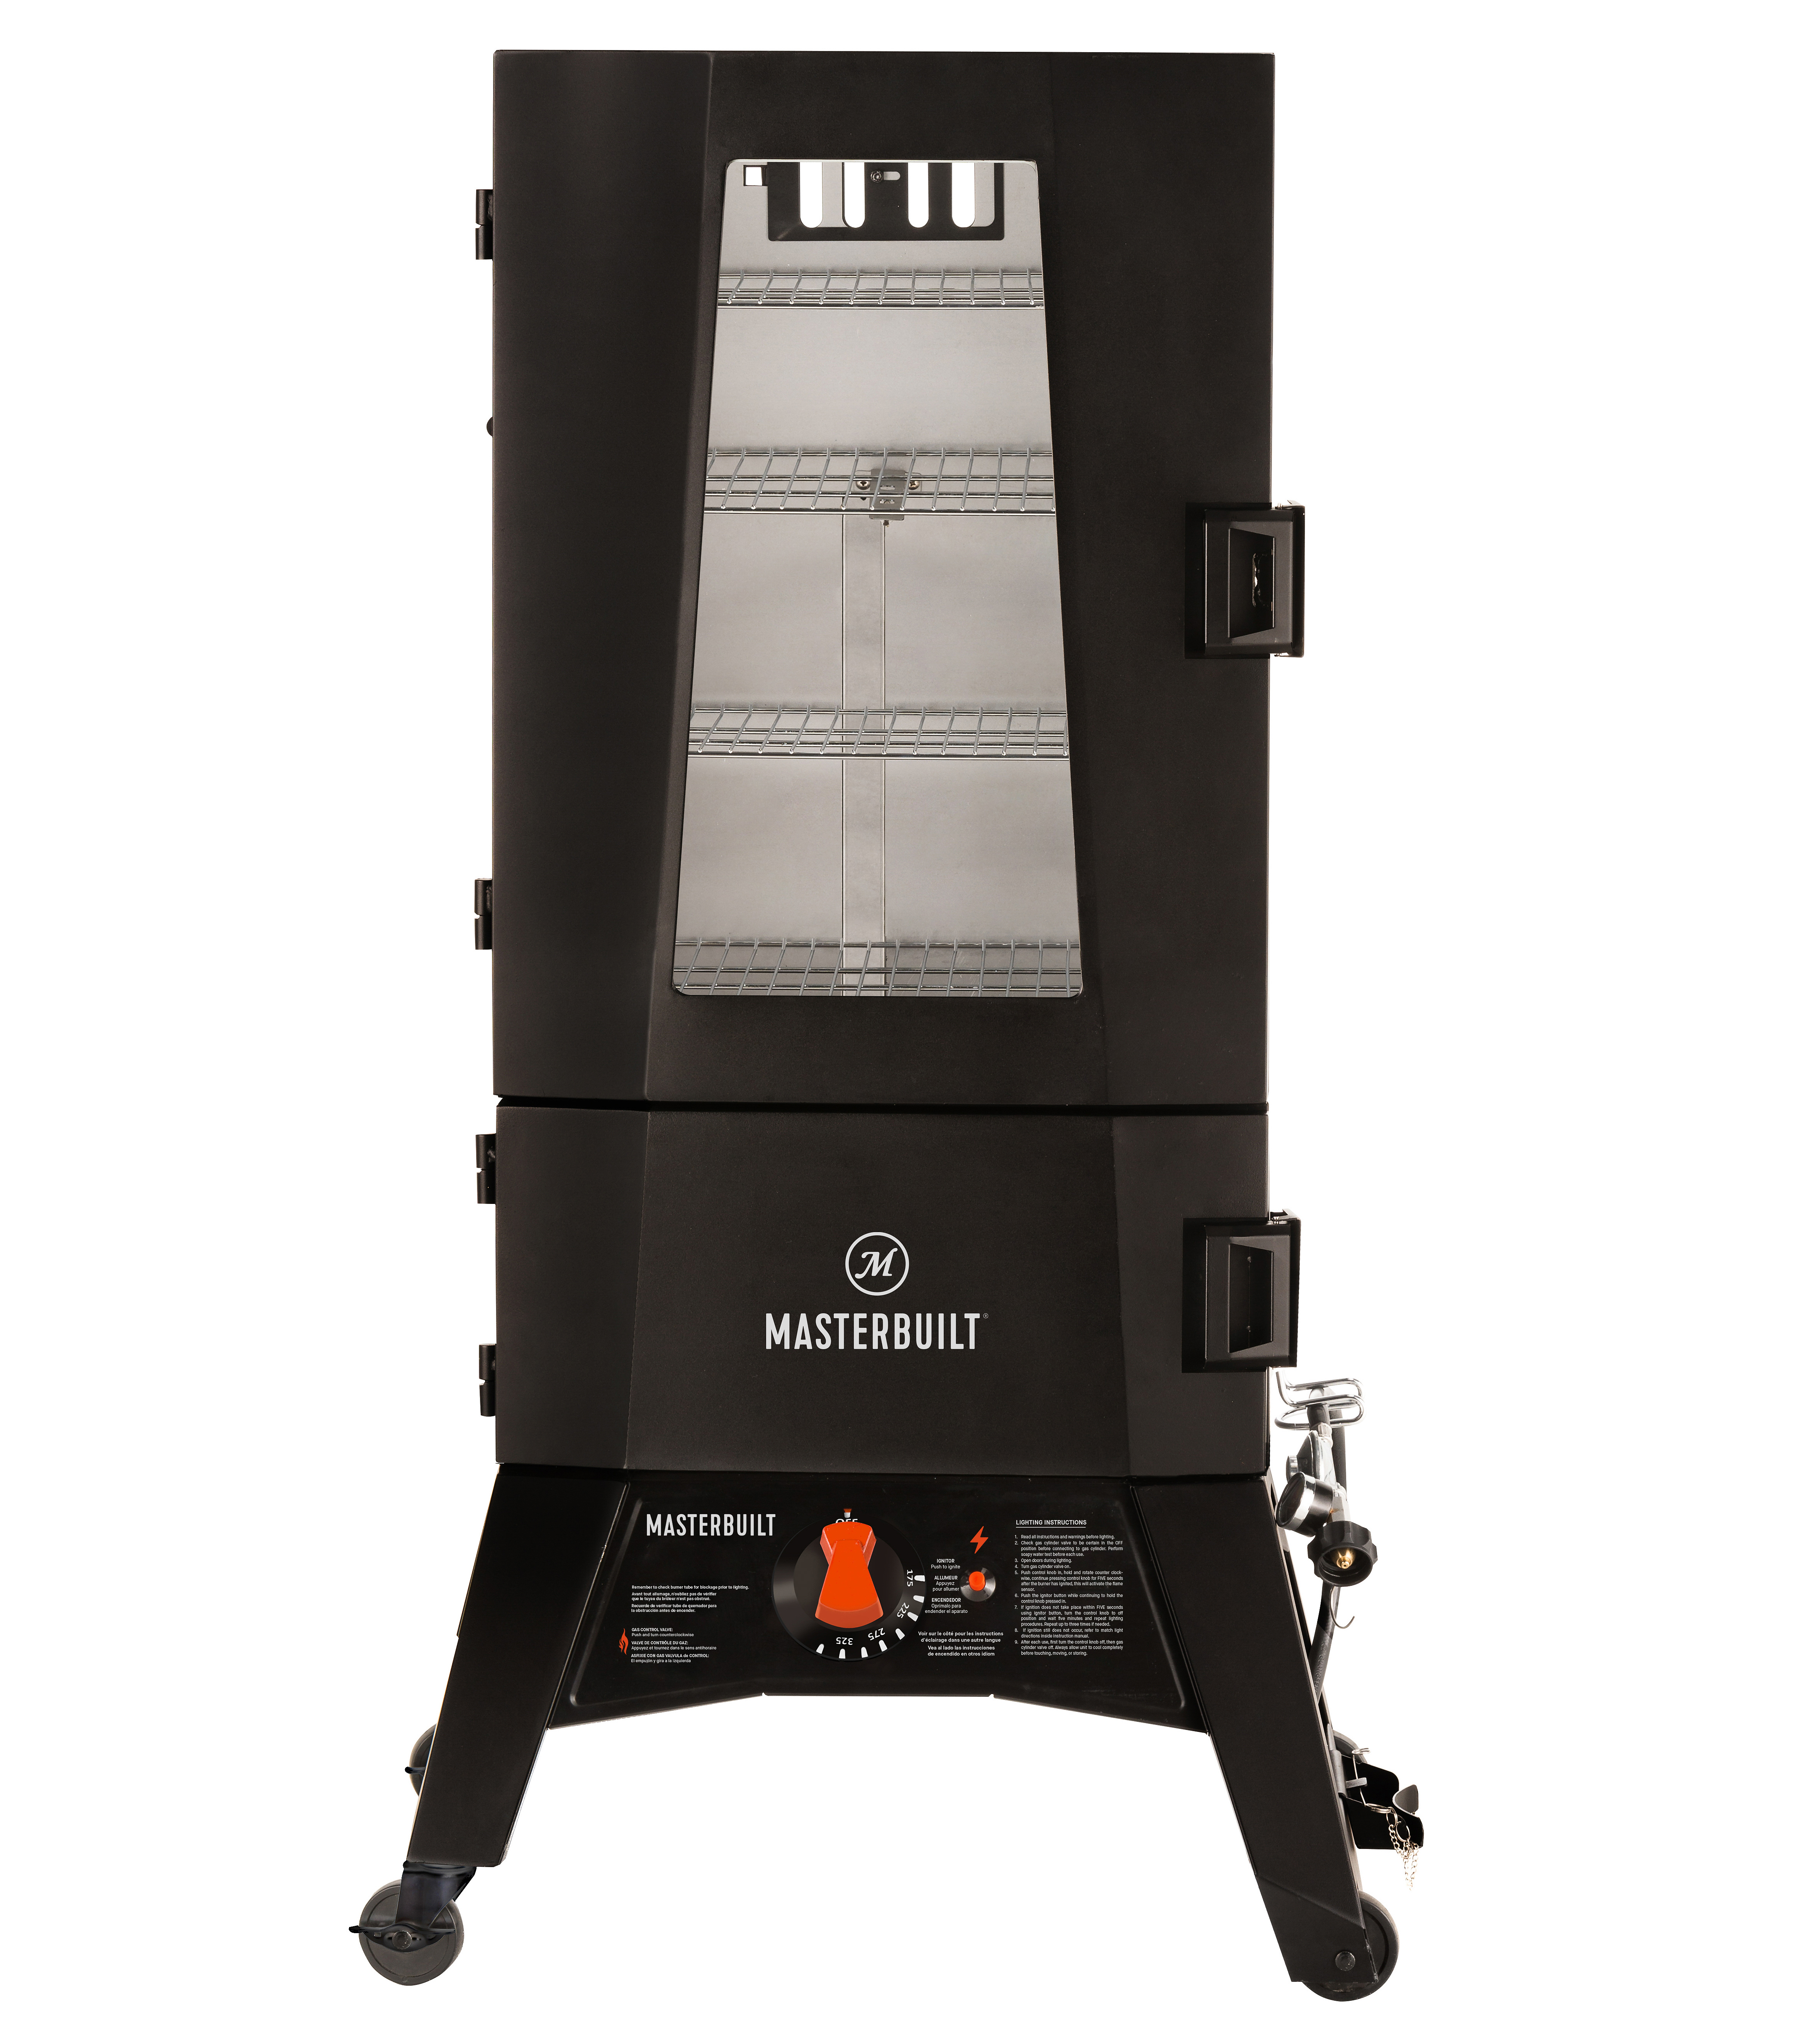 Masterbuilt 40-inch ThermoTemp XL Propane Smoker with Window in Black - image 1 of 10